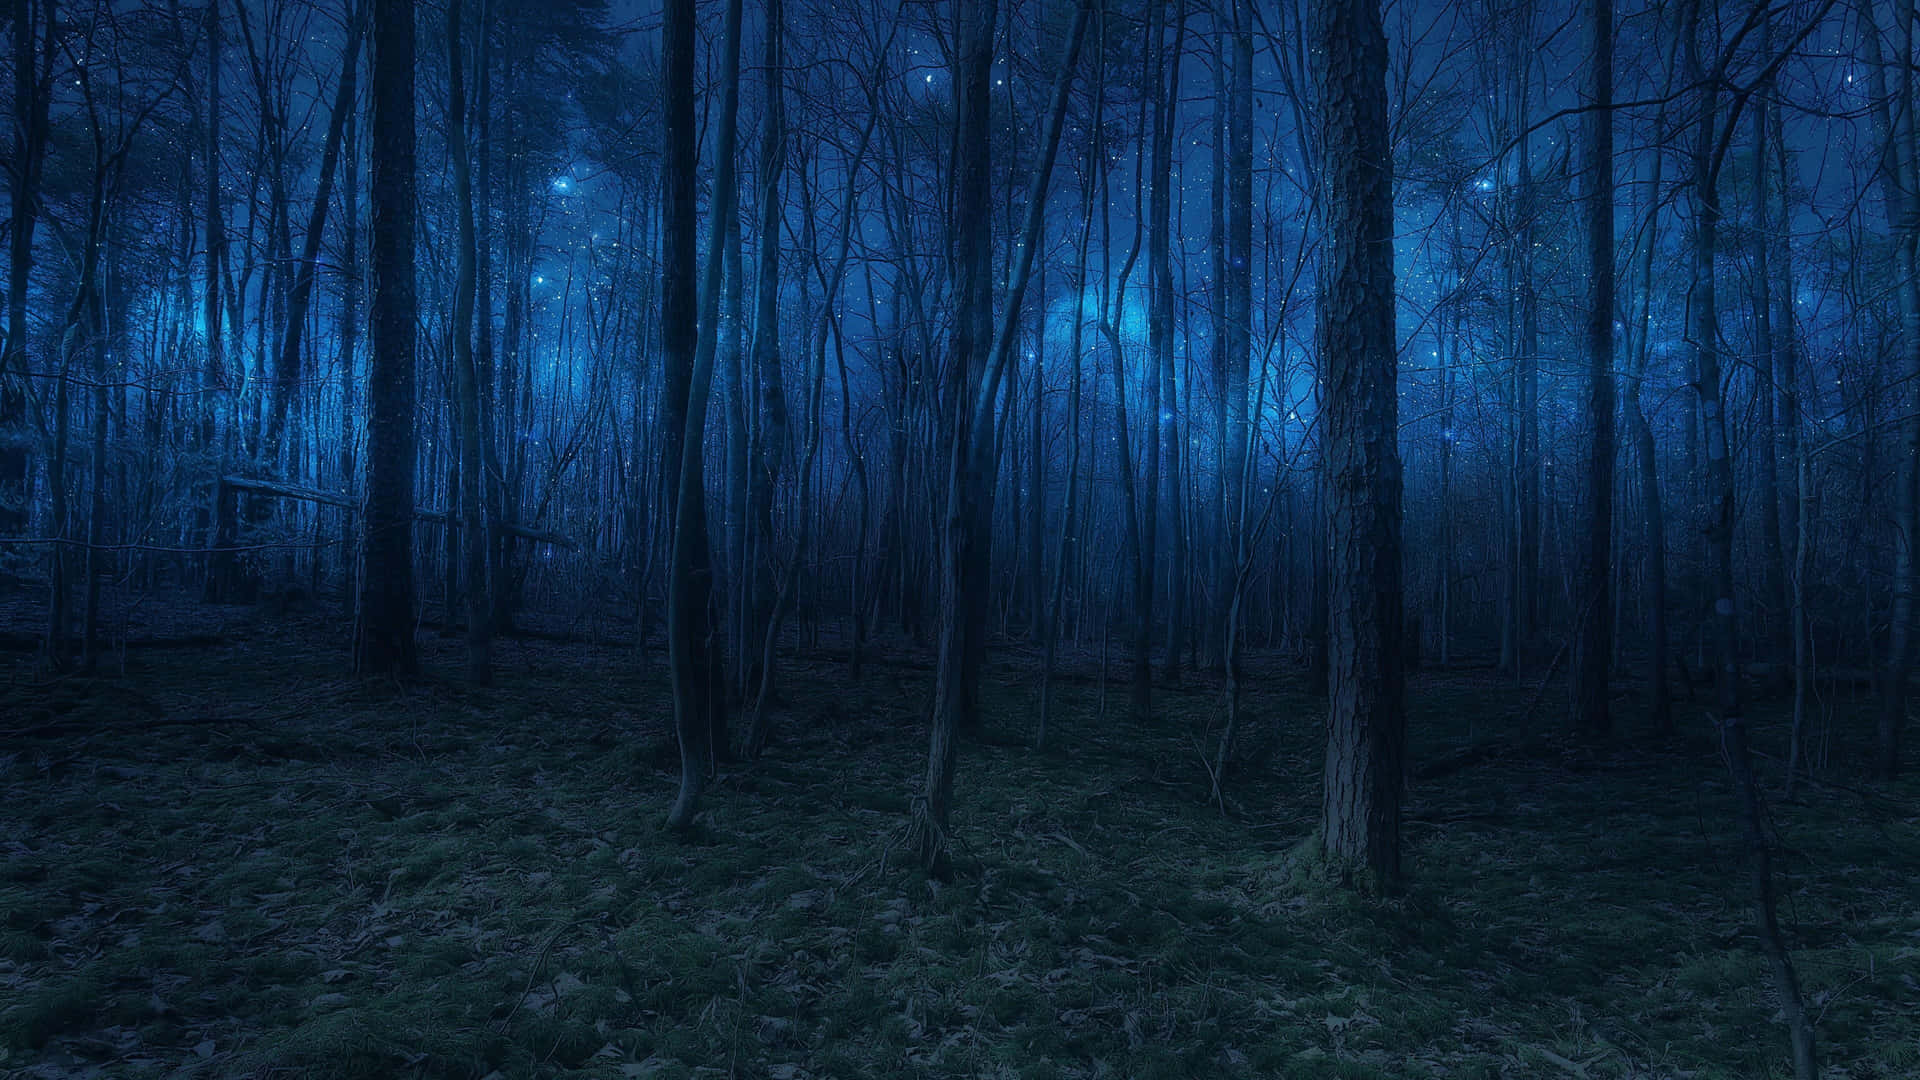 experience the stillness of a serene night in the secluded forest Wallpaper